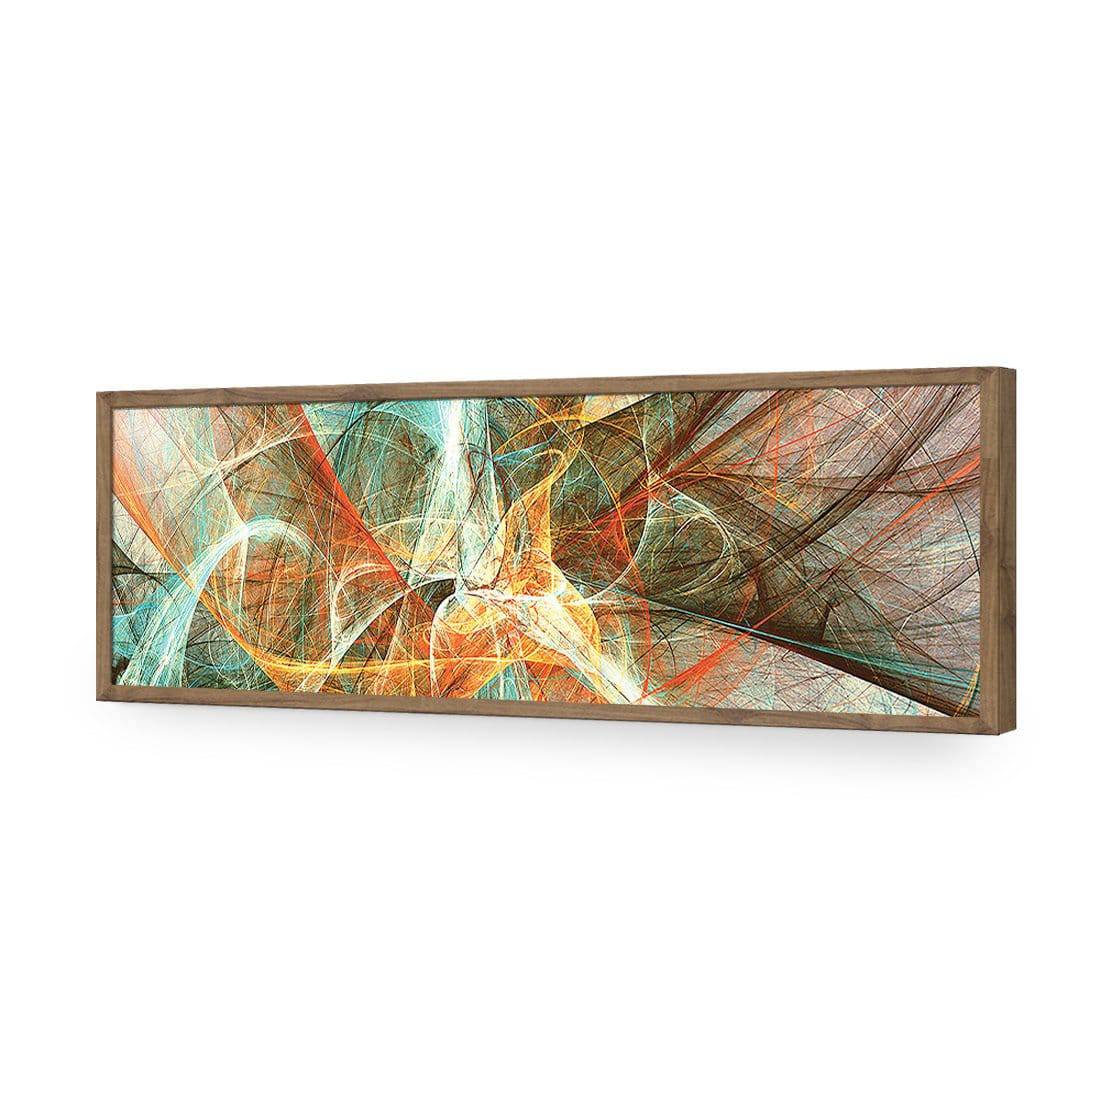 Webbed, Long-Acrylic-Wall Art Design-Without Border-Acrylic - Natural Frame-60x20cm-Wall Art Designs